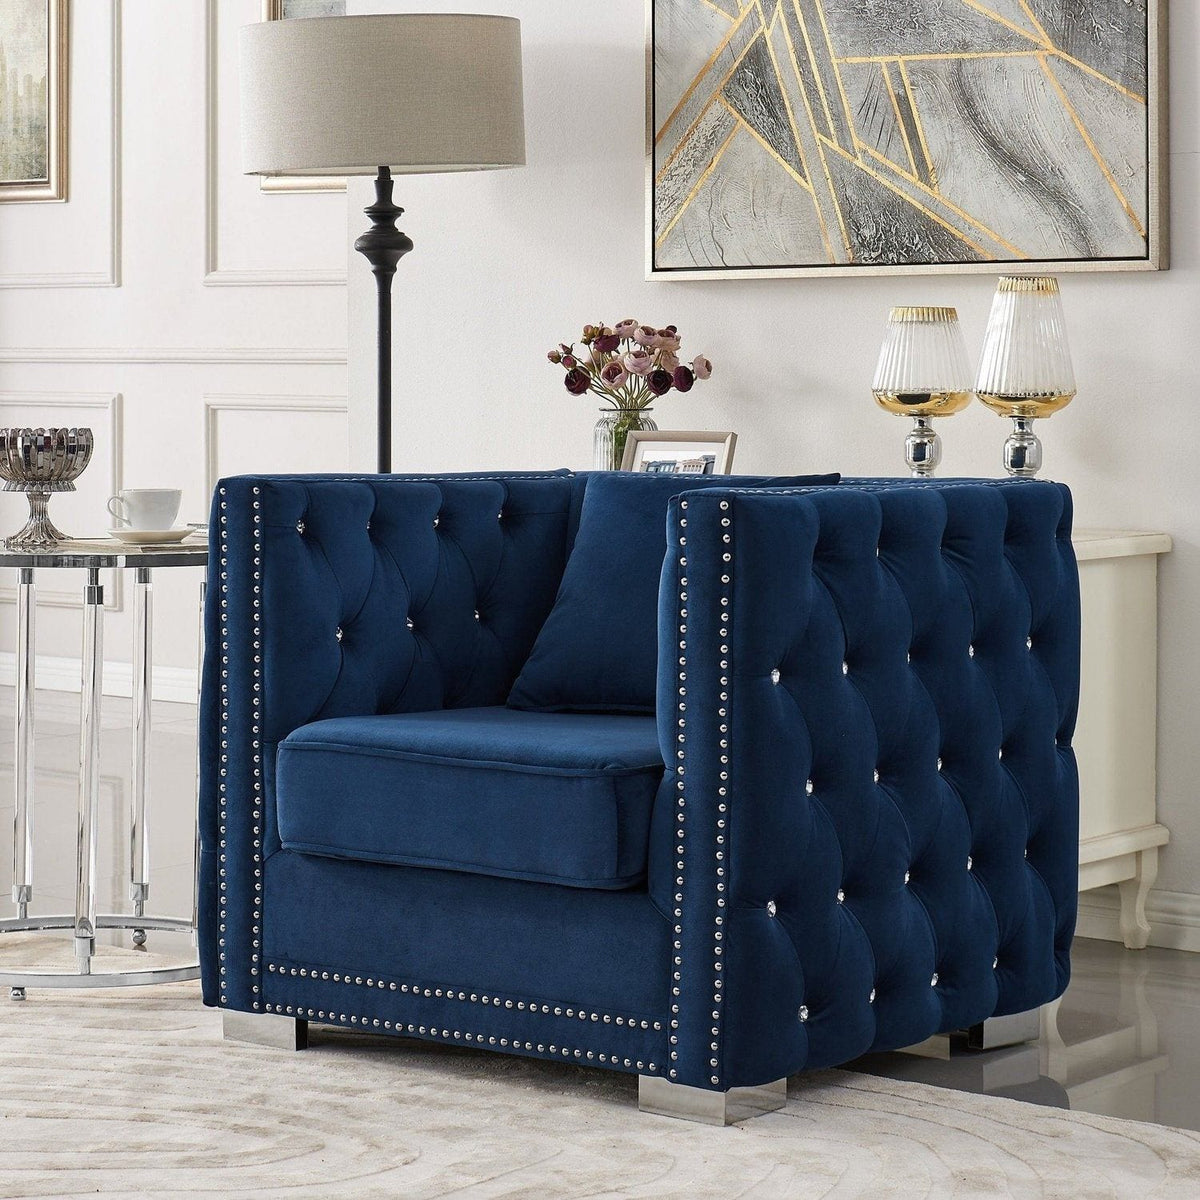 Velvet Home Tufted Home Iconic – Chic Chair Shelter Design Christophe Club Arm